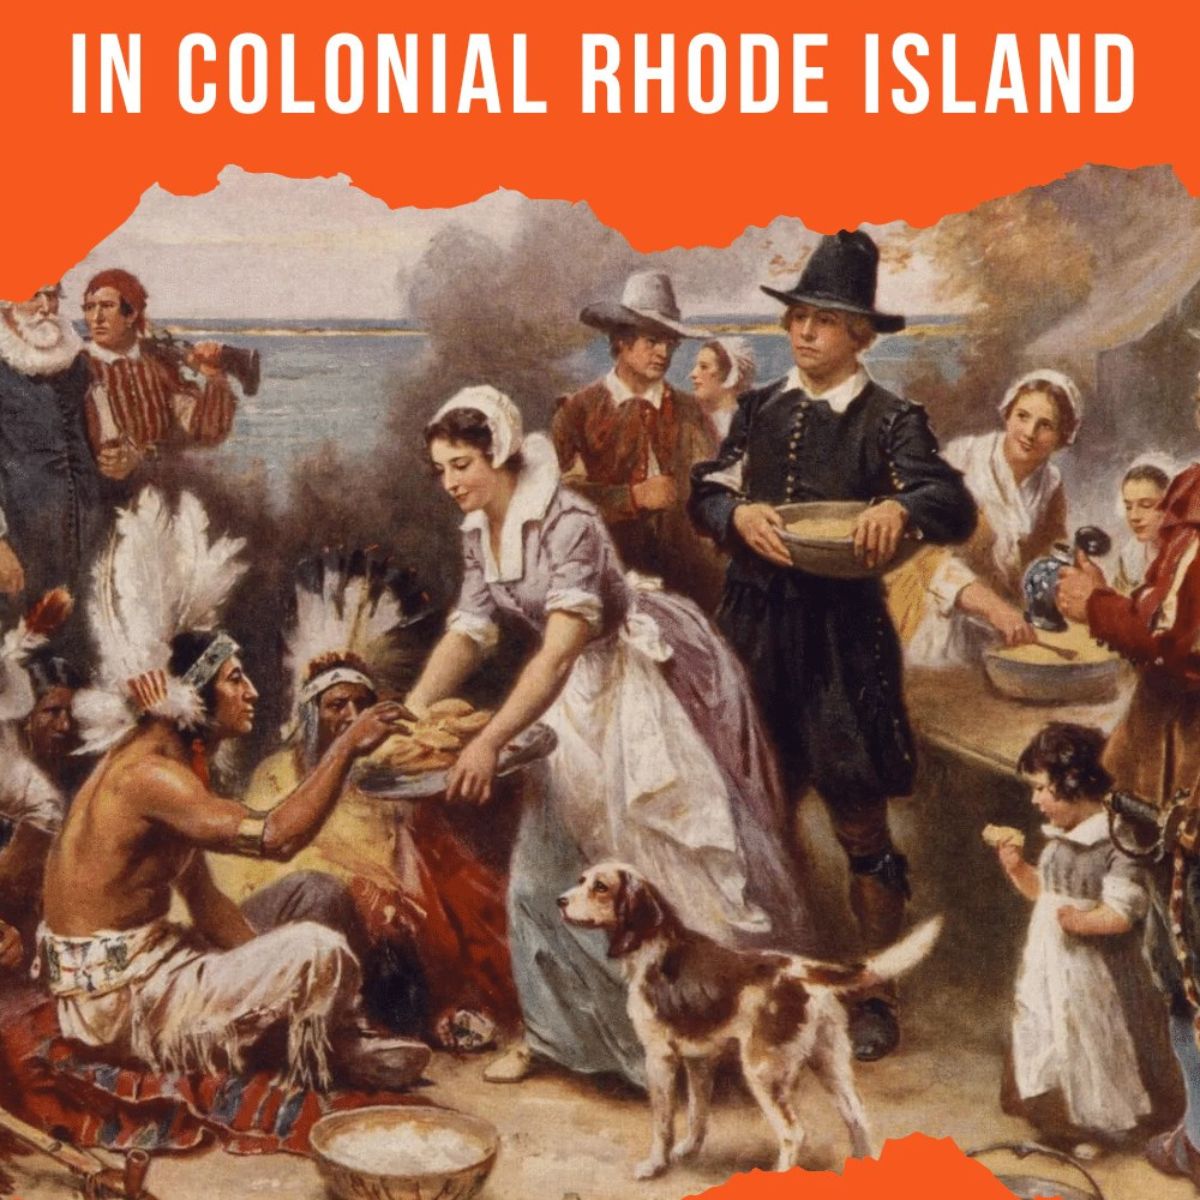 5 Common Jobs In Colonial Rhode Island